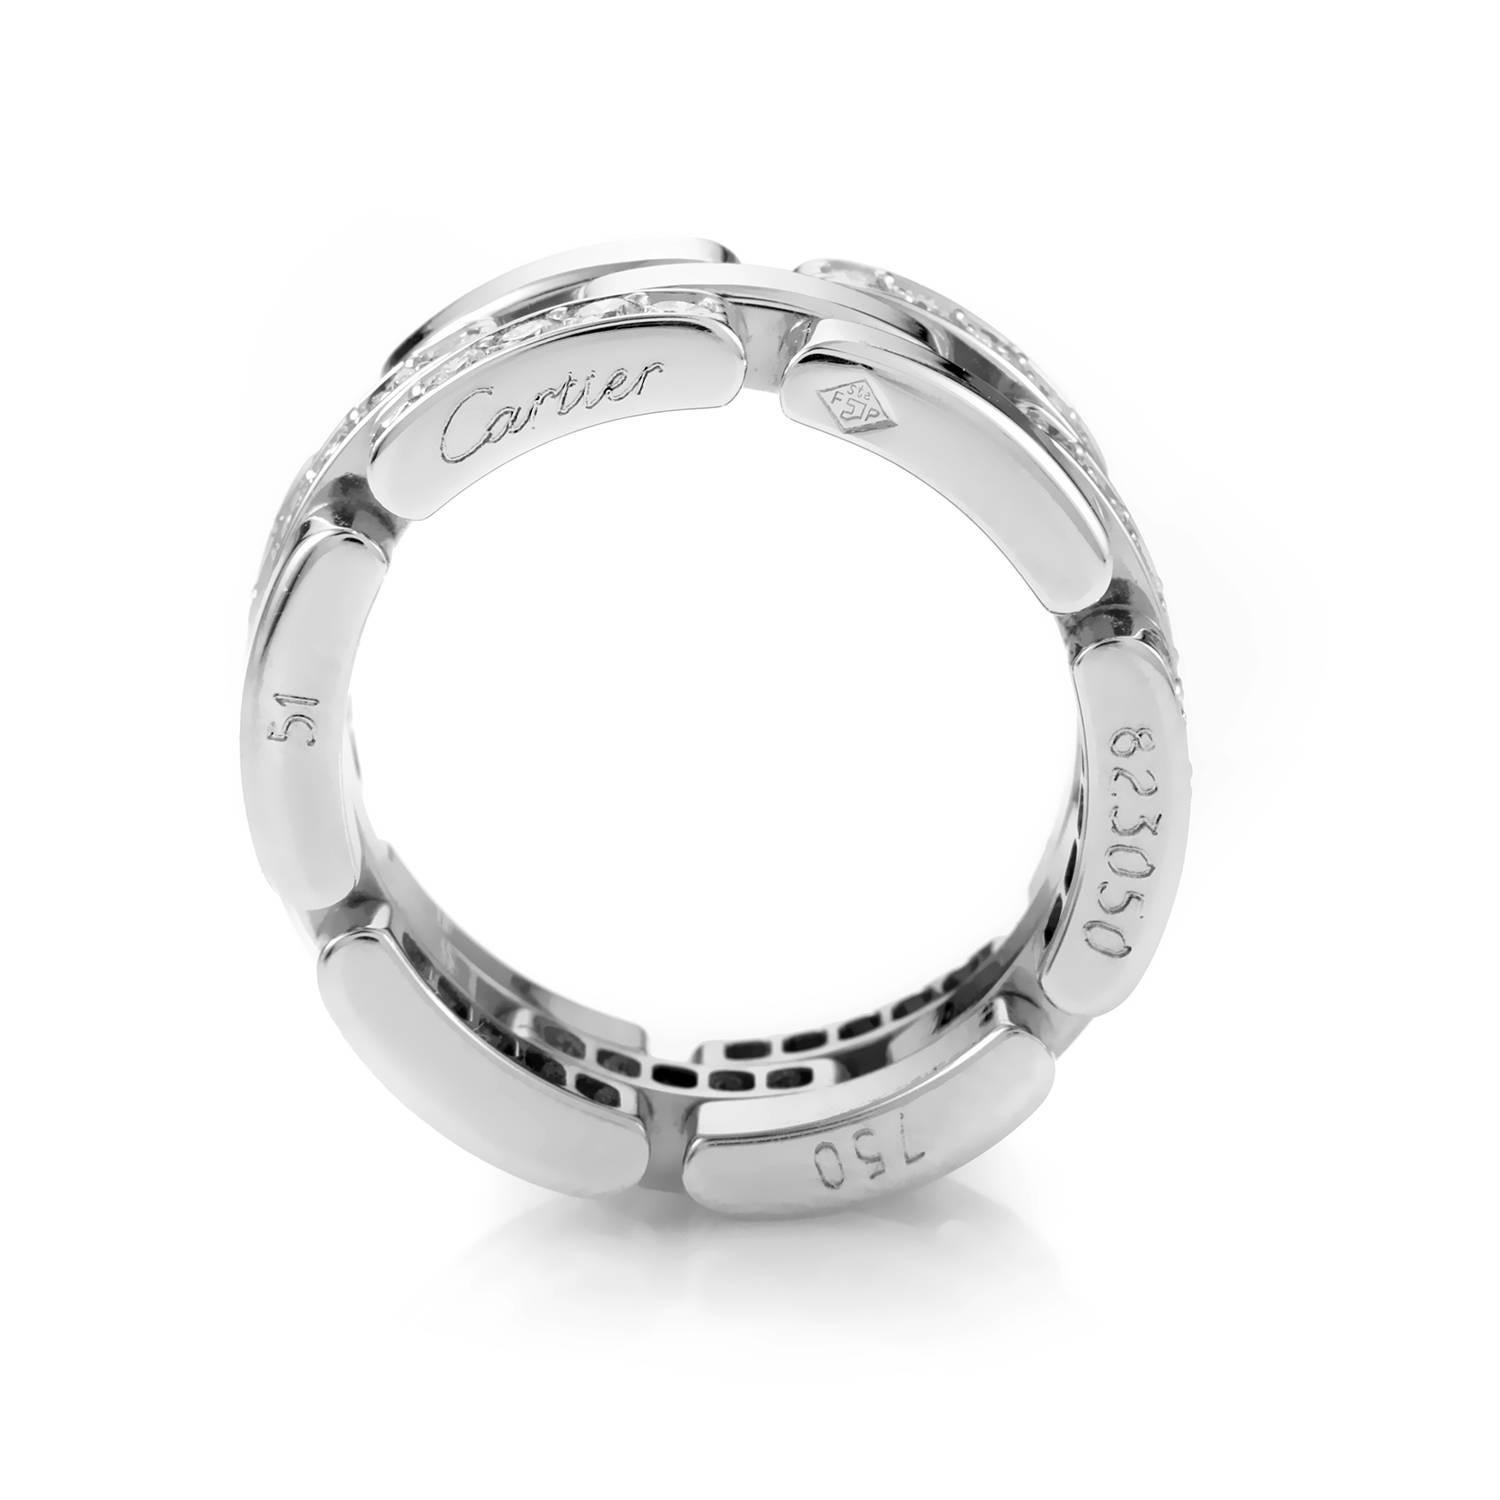 Alternating between impeccable polish and sparkling diamond setting, the intriguing surface of this elegant band from Cartier is given a bright tone from the harmonious blend of 18K white gold and brilliant diamonds weighing in total approximately